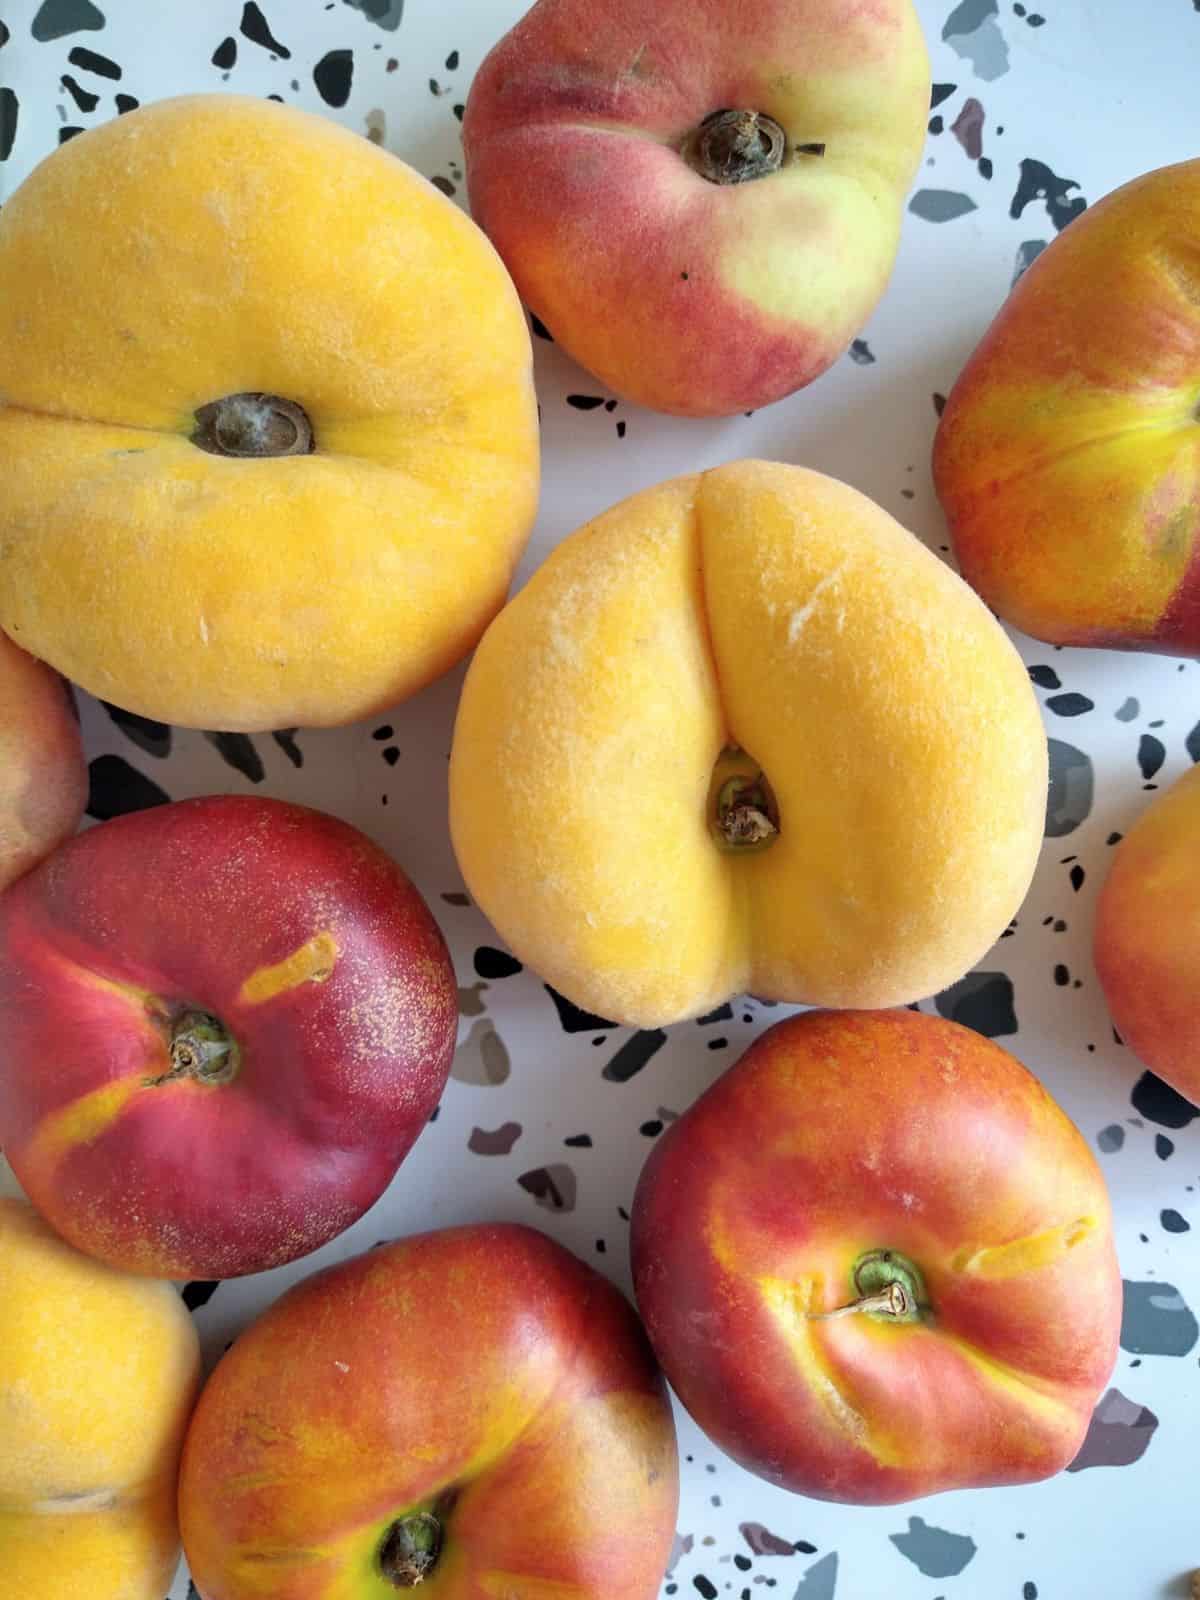 3 different types of Donut peaches and nectarine on a white table with colored dots.